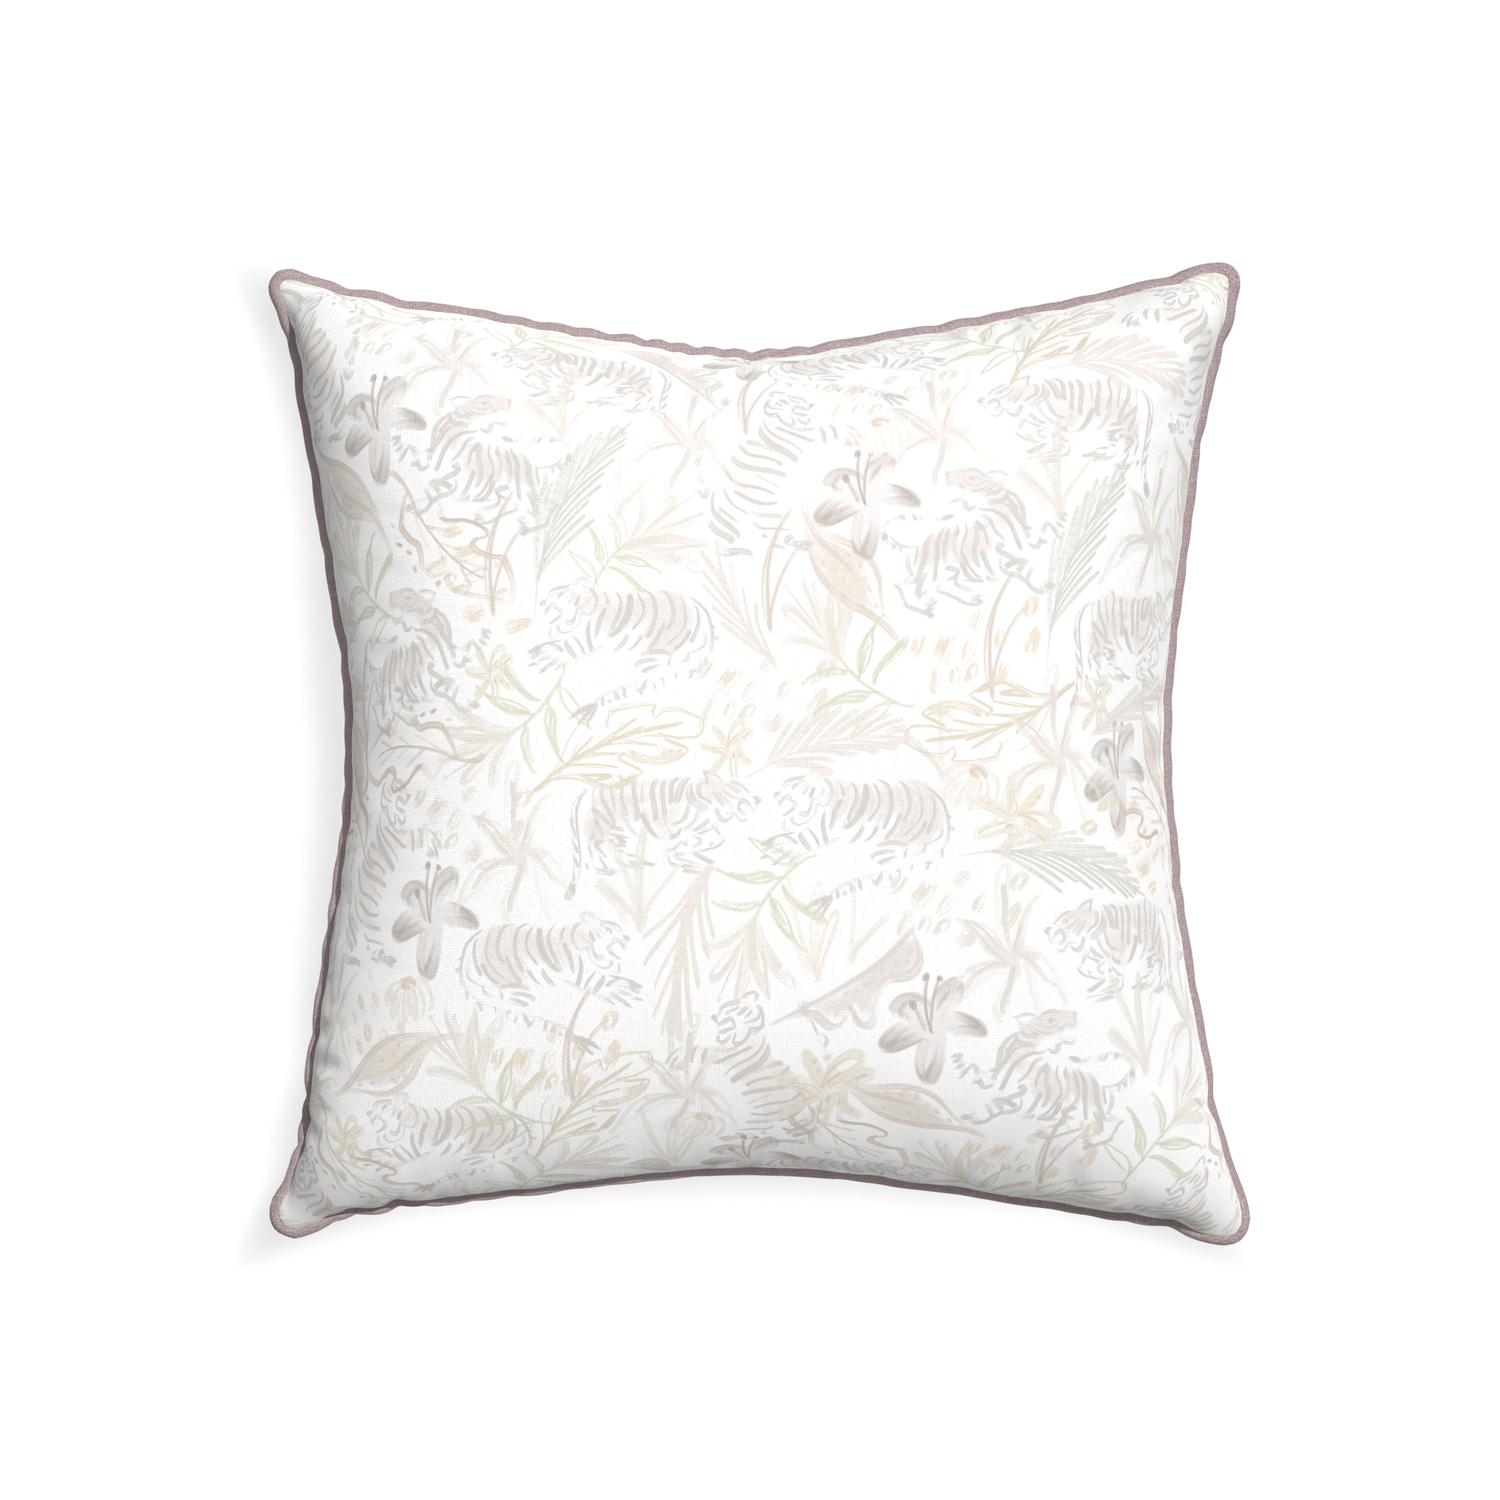 22-square frida sand custom beige chinoiserie tigerpillow with orchid piping on white background